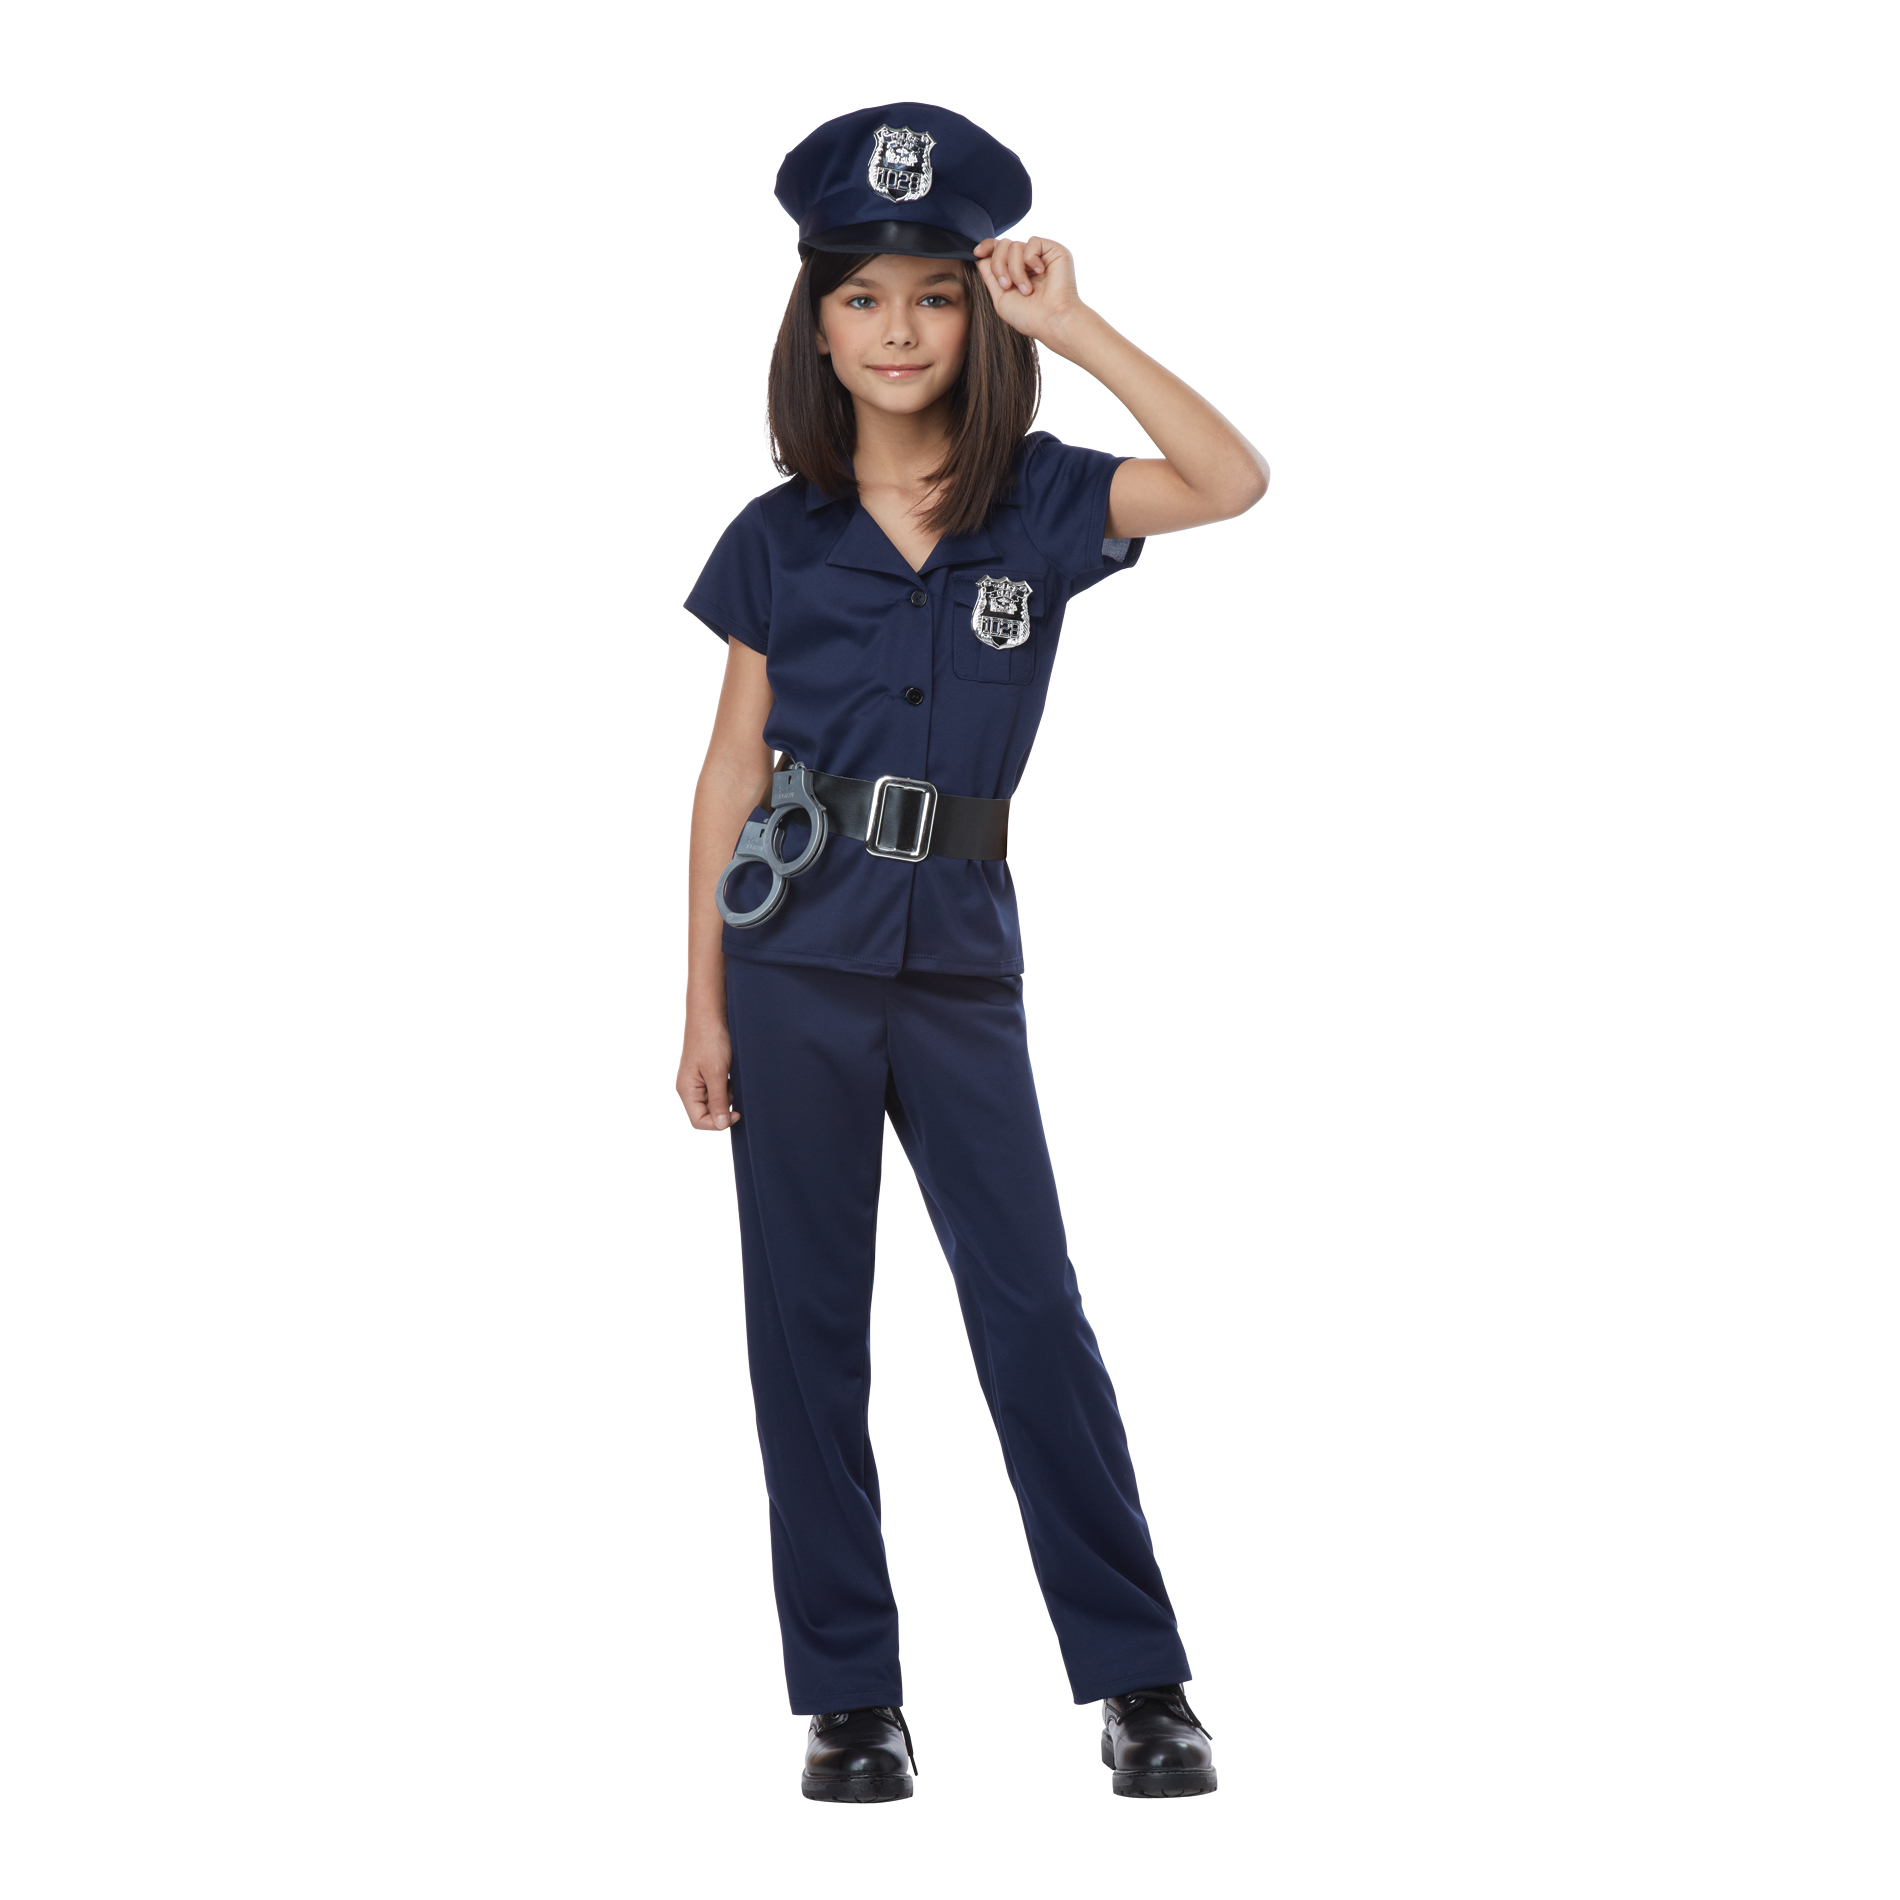 Totally Ghoul Police Officer Girls Halloween Costume